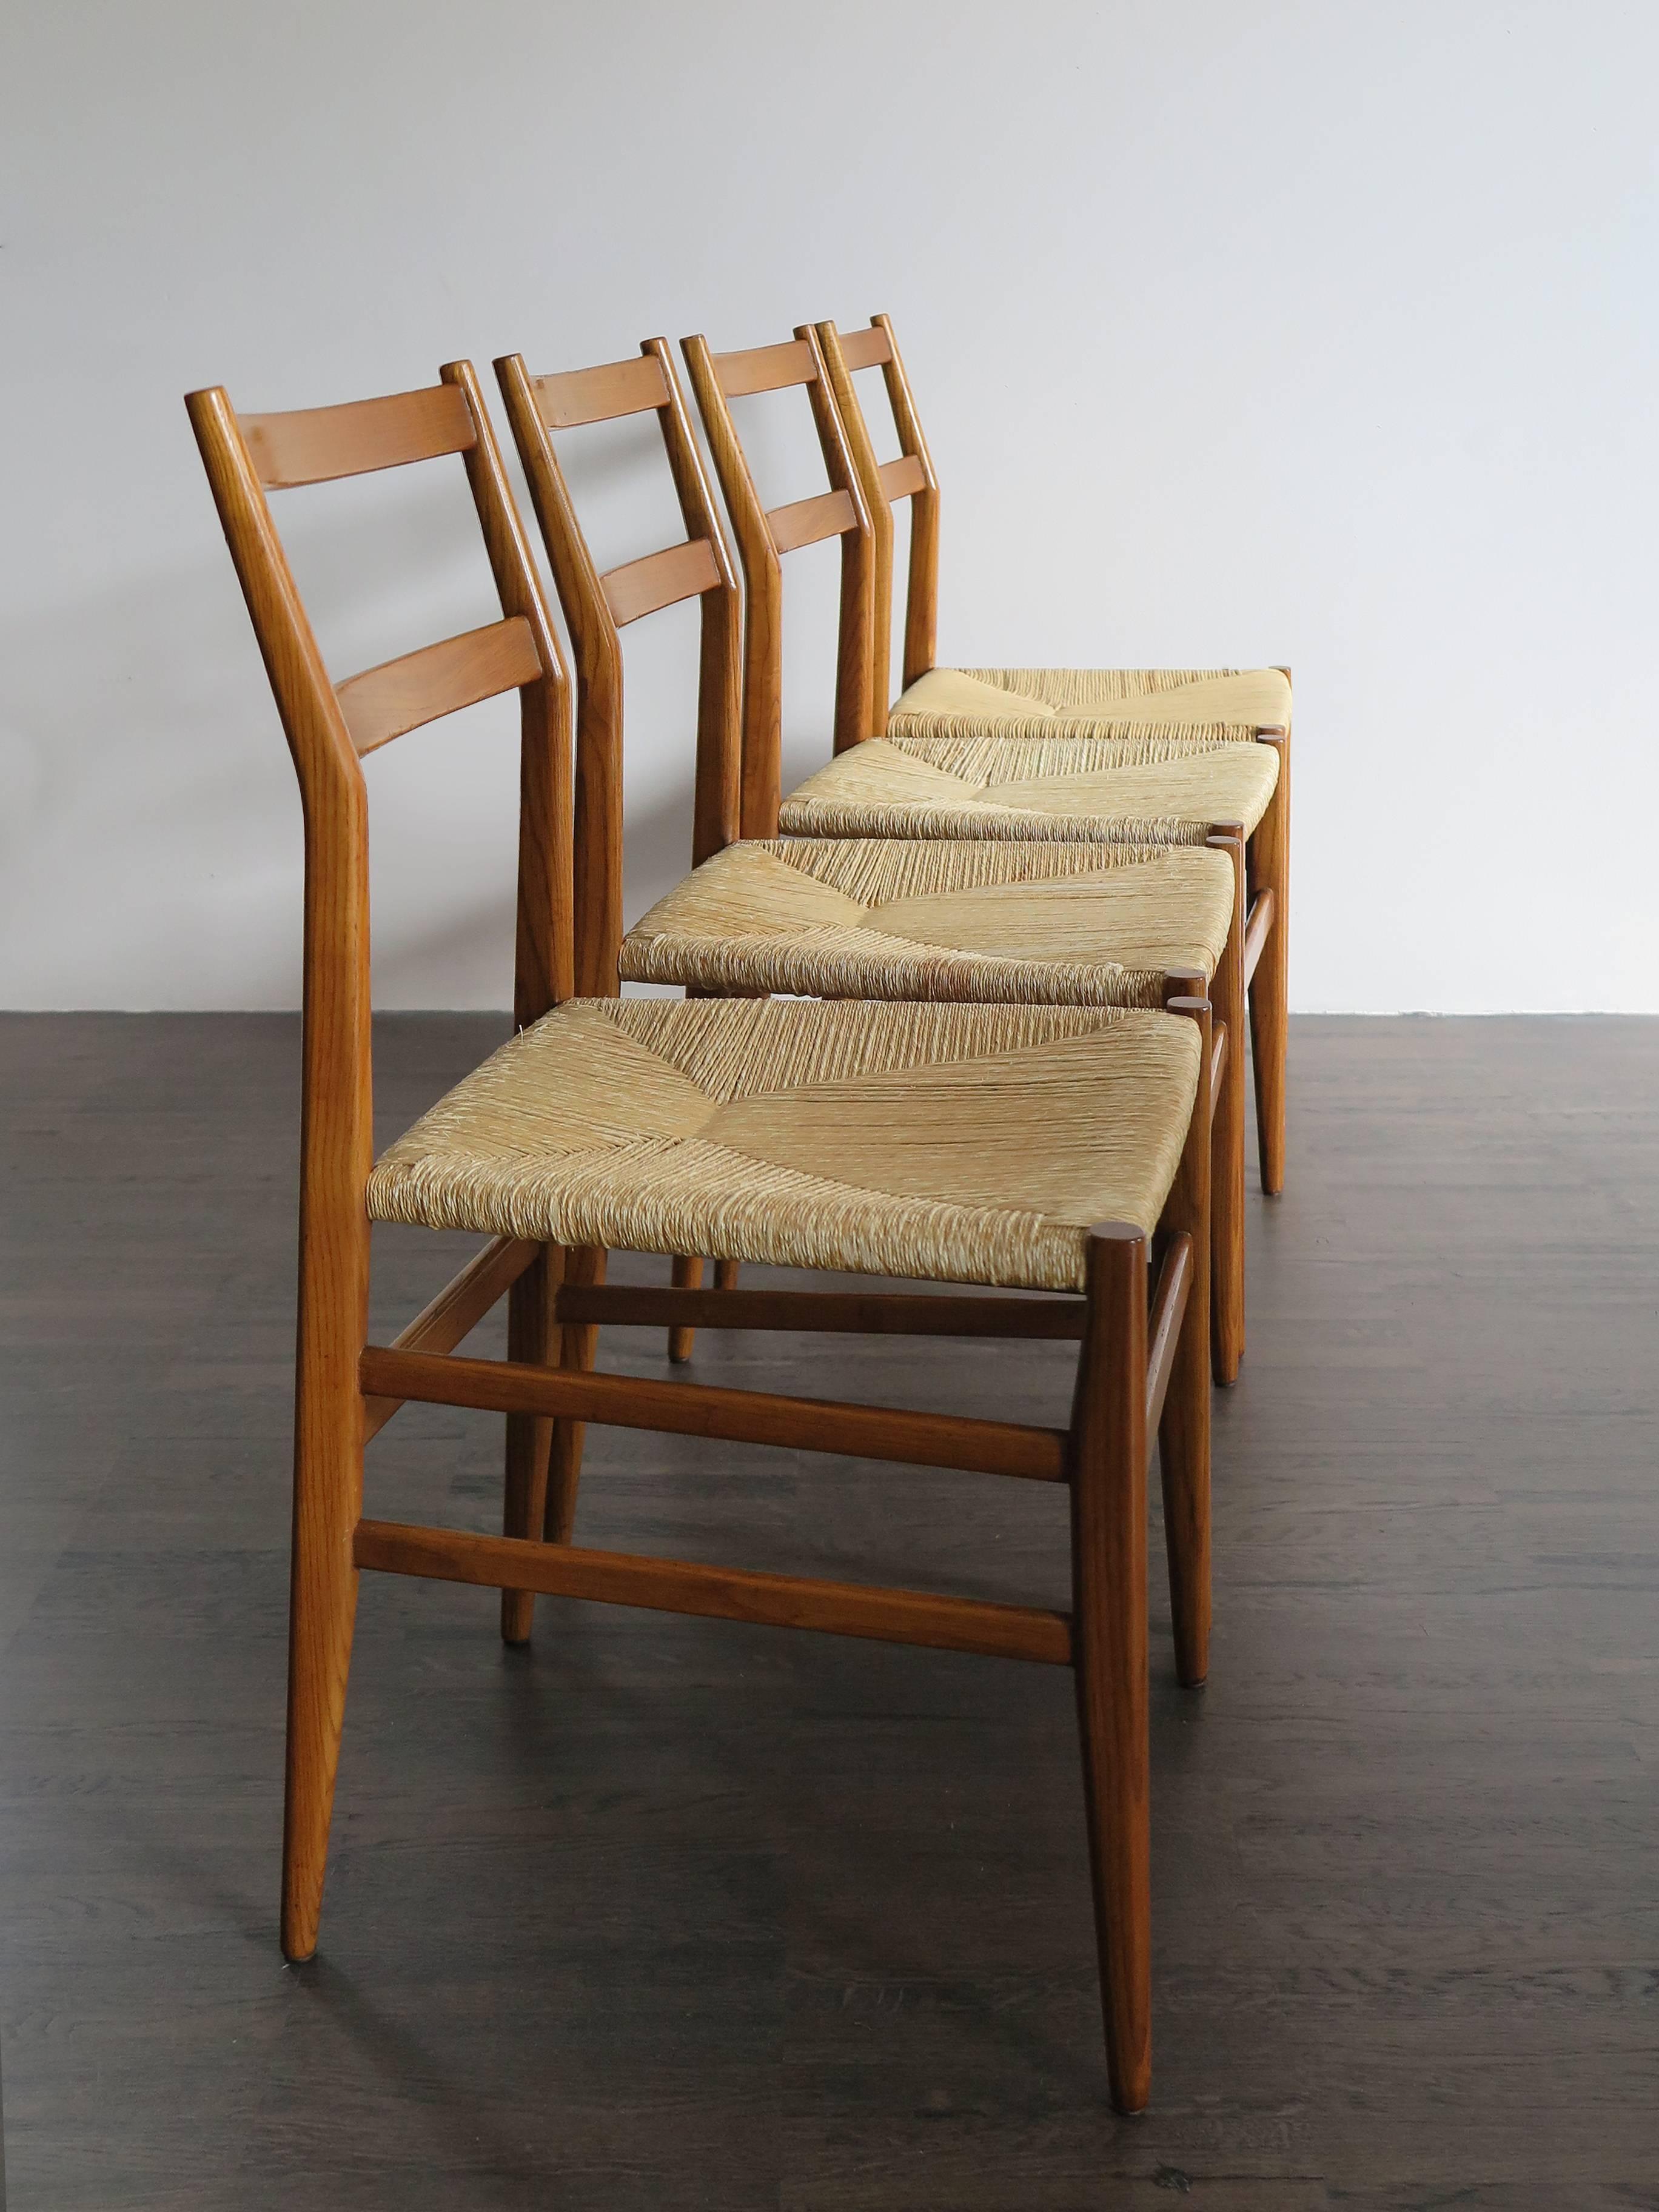 1950s four dining chairs model Leggera designed by Gio Ponti for Cassina,
ash structure and raffia seat.